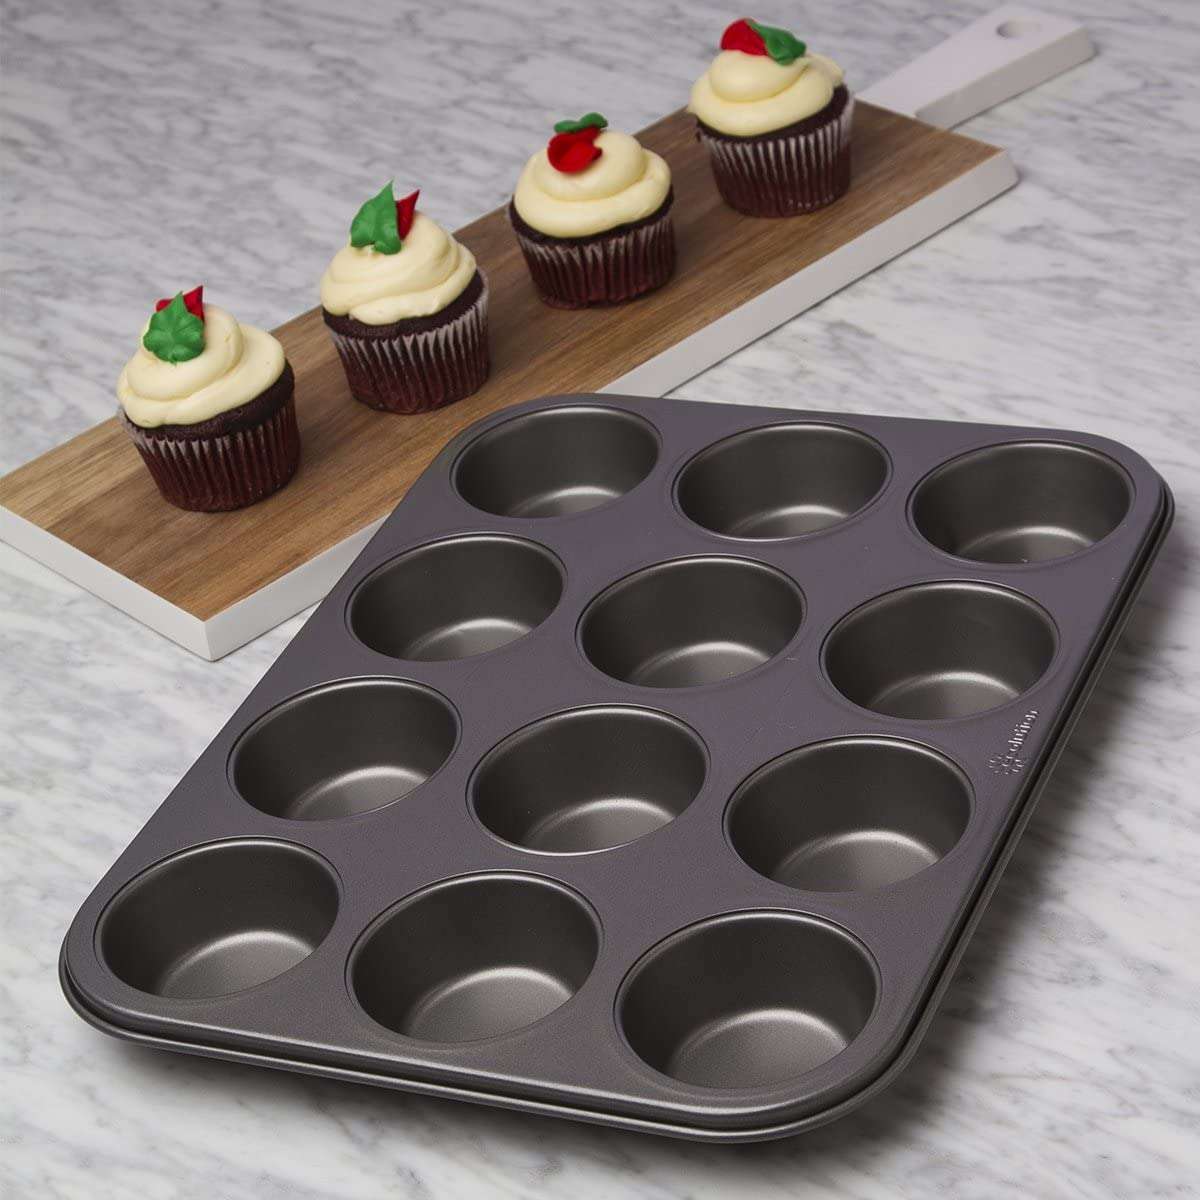 12 Cup Muffin Pan Gray